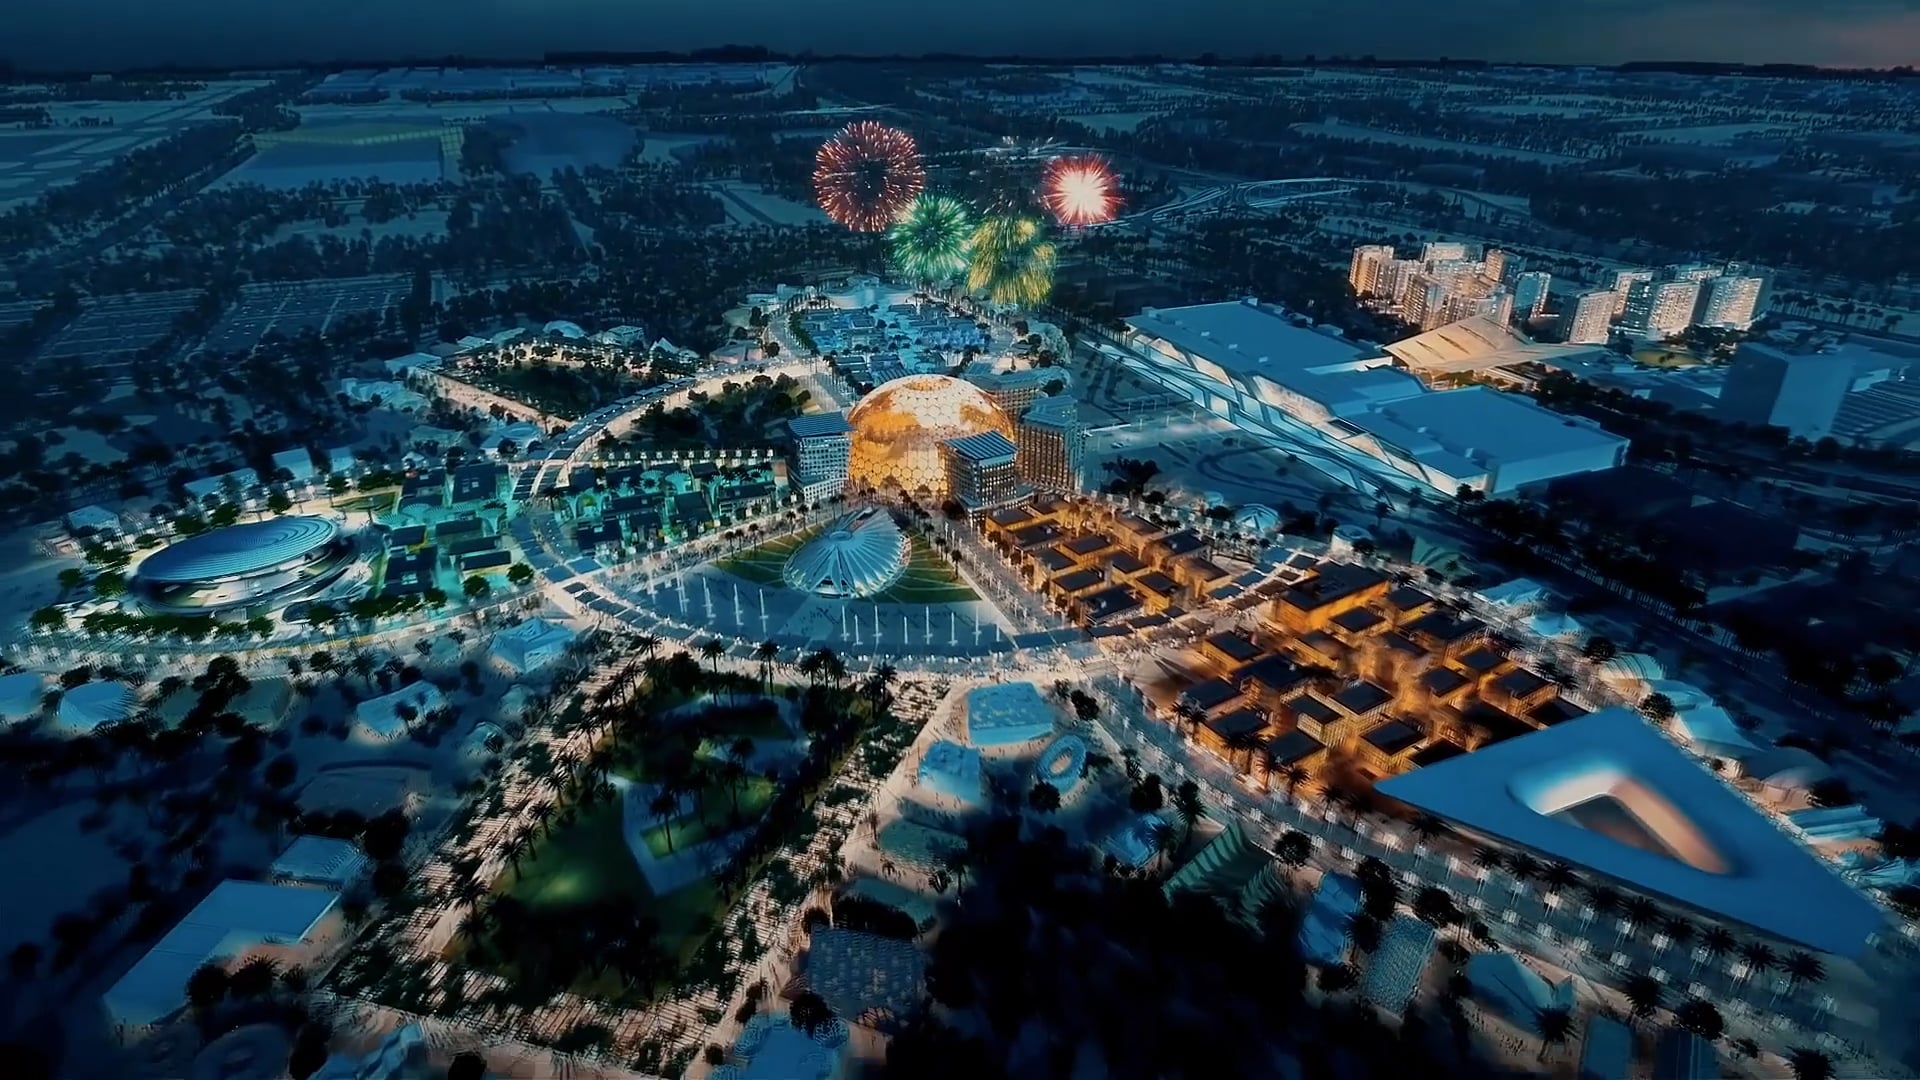 What is Expo2020?